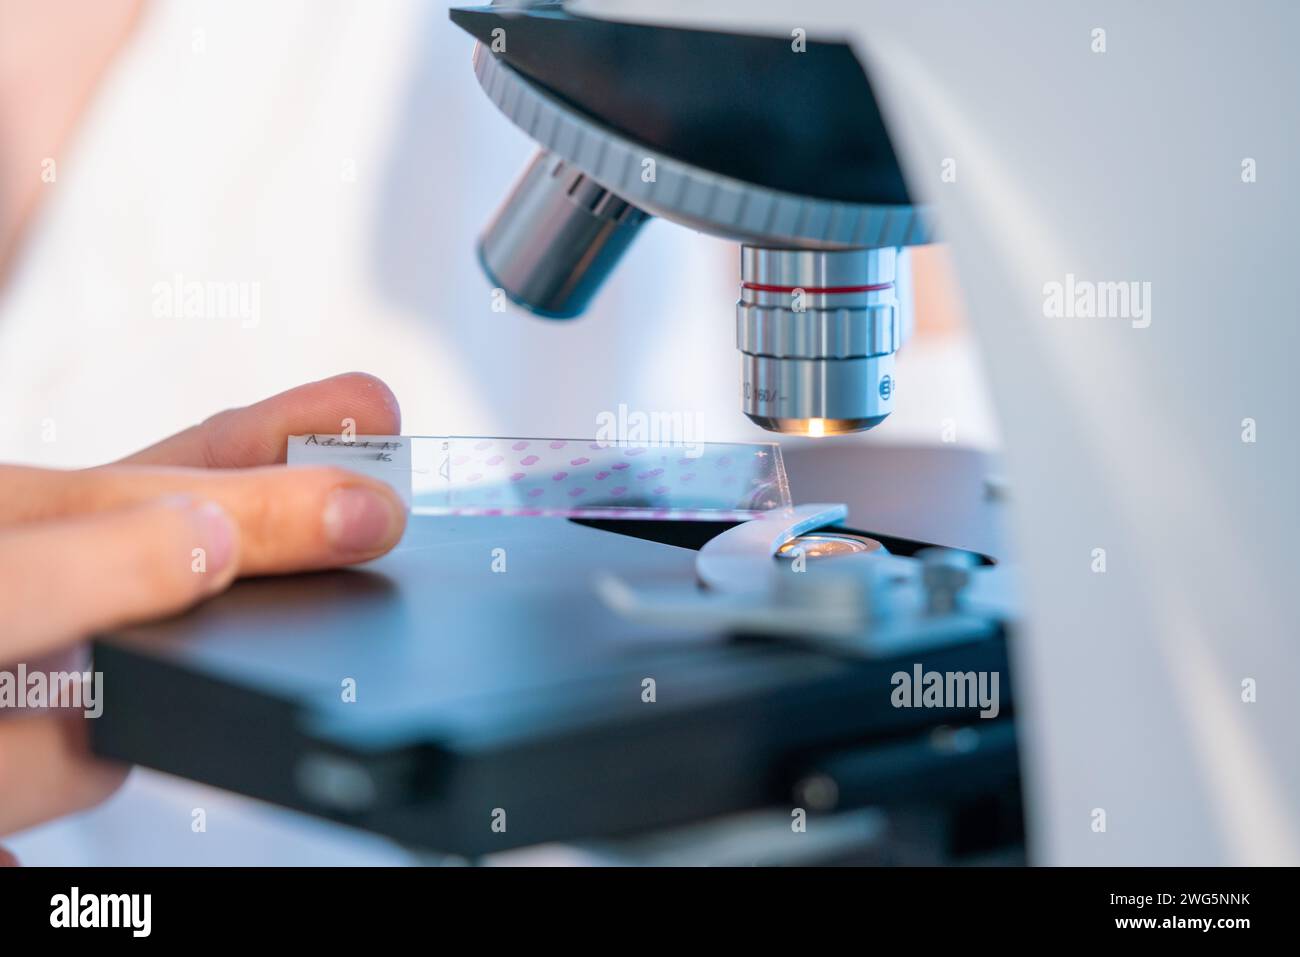 Microorganism study: Microscopes are used to investigate bacteria, viruses, fungi, and other microorganisms. Stock Photo